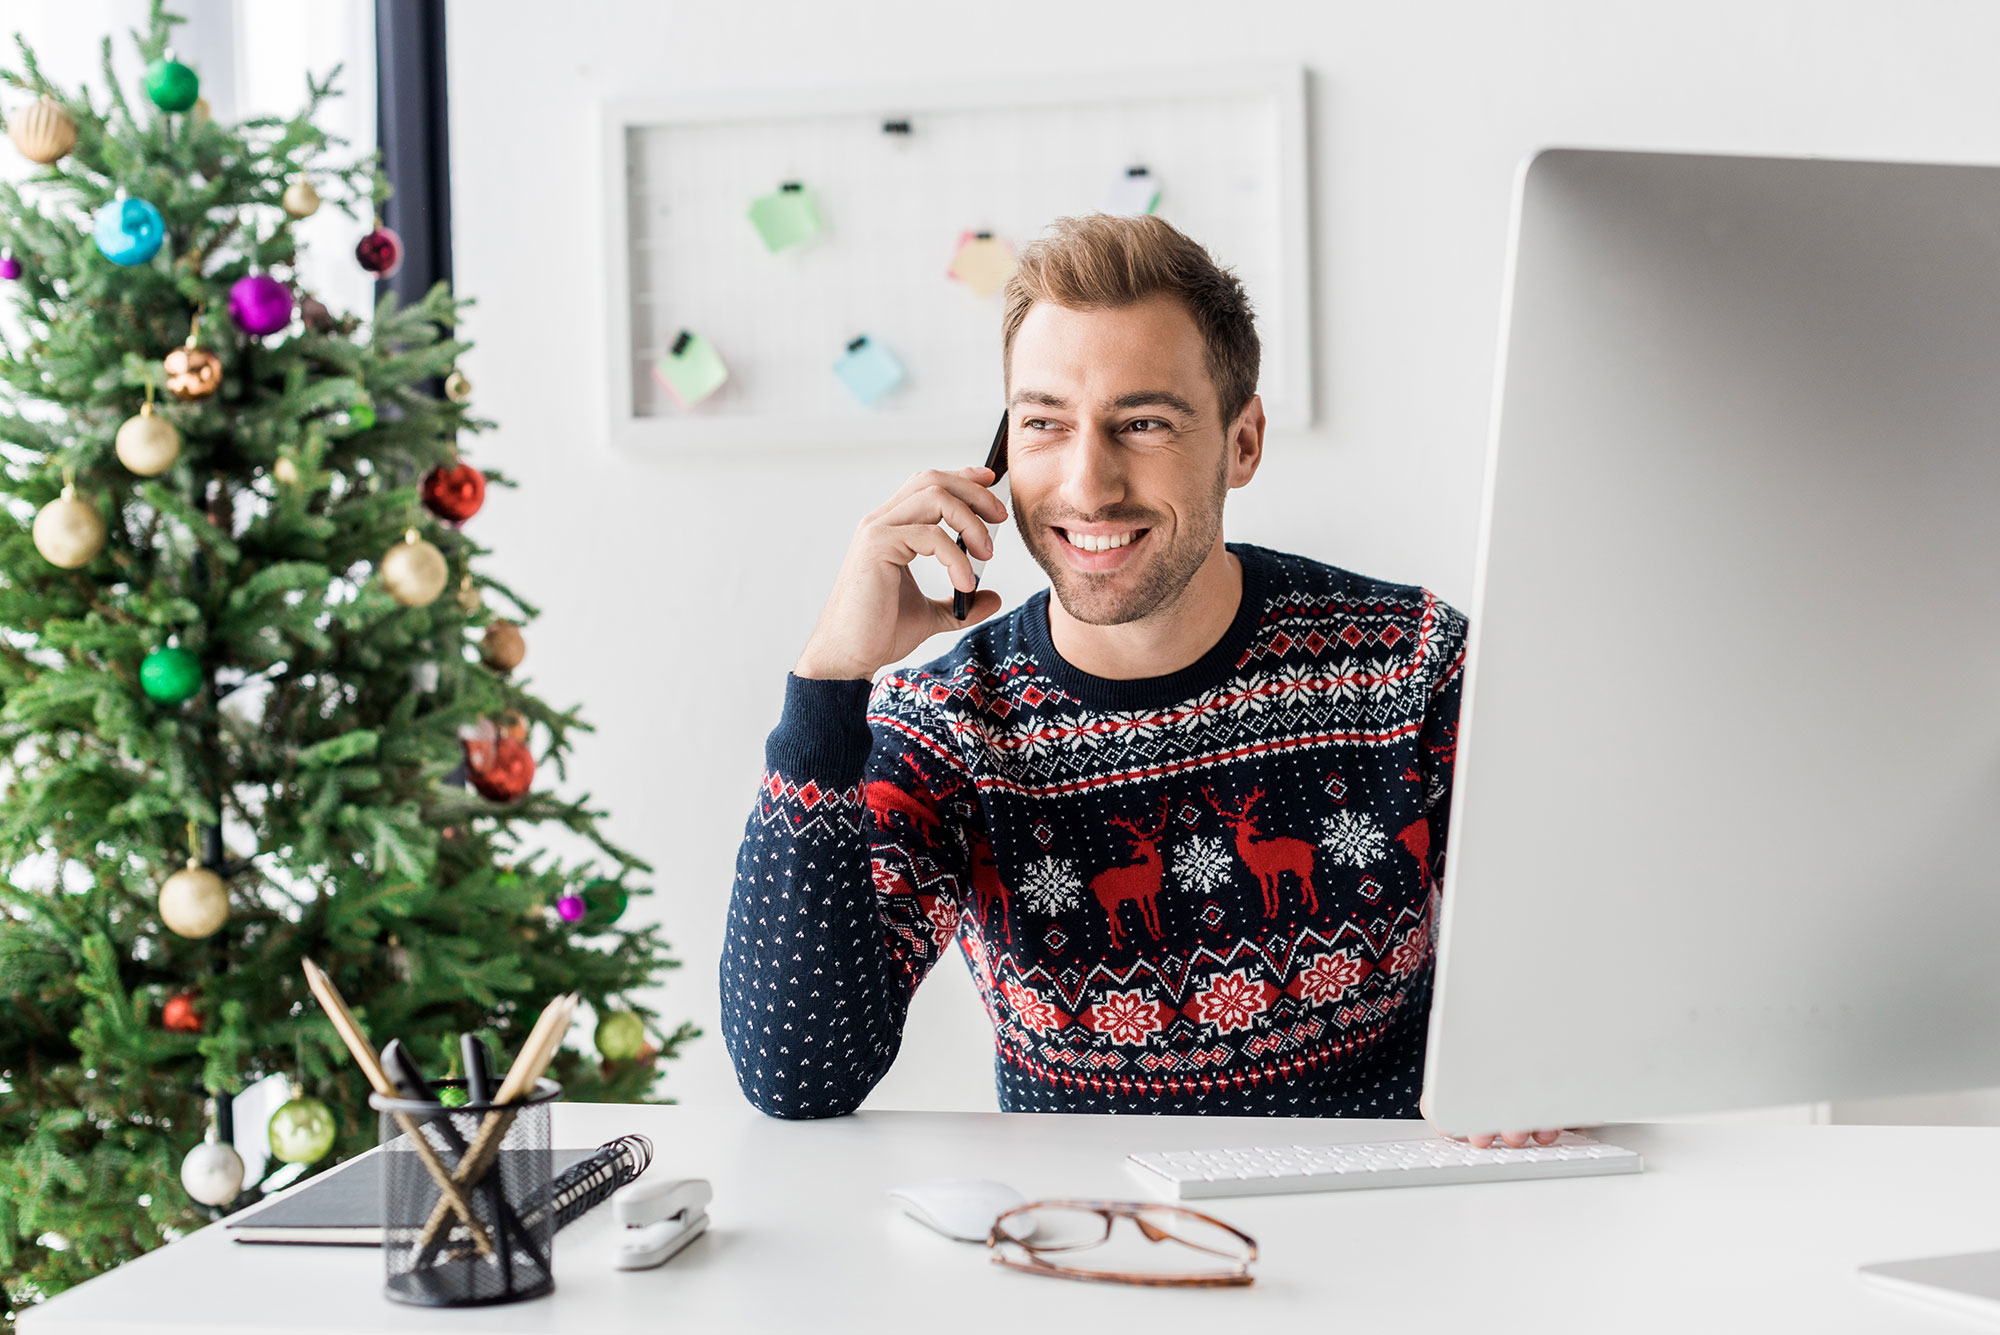 Man in holiday sweater working